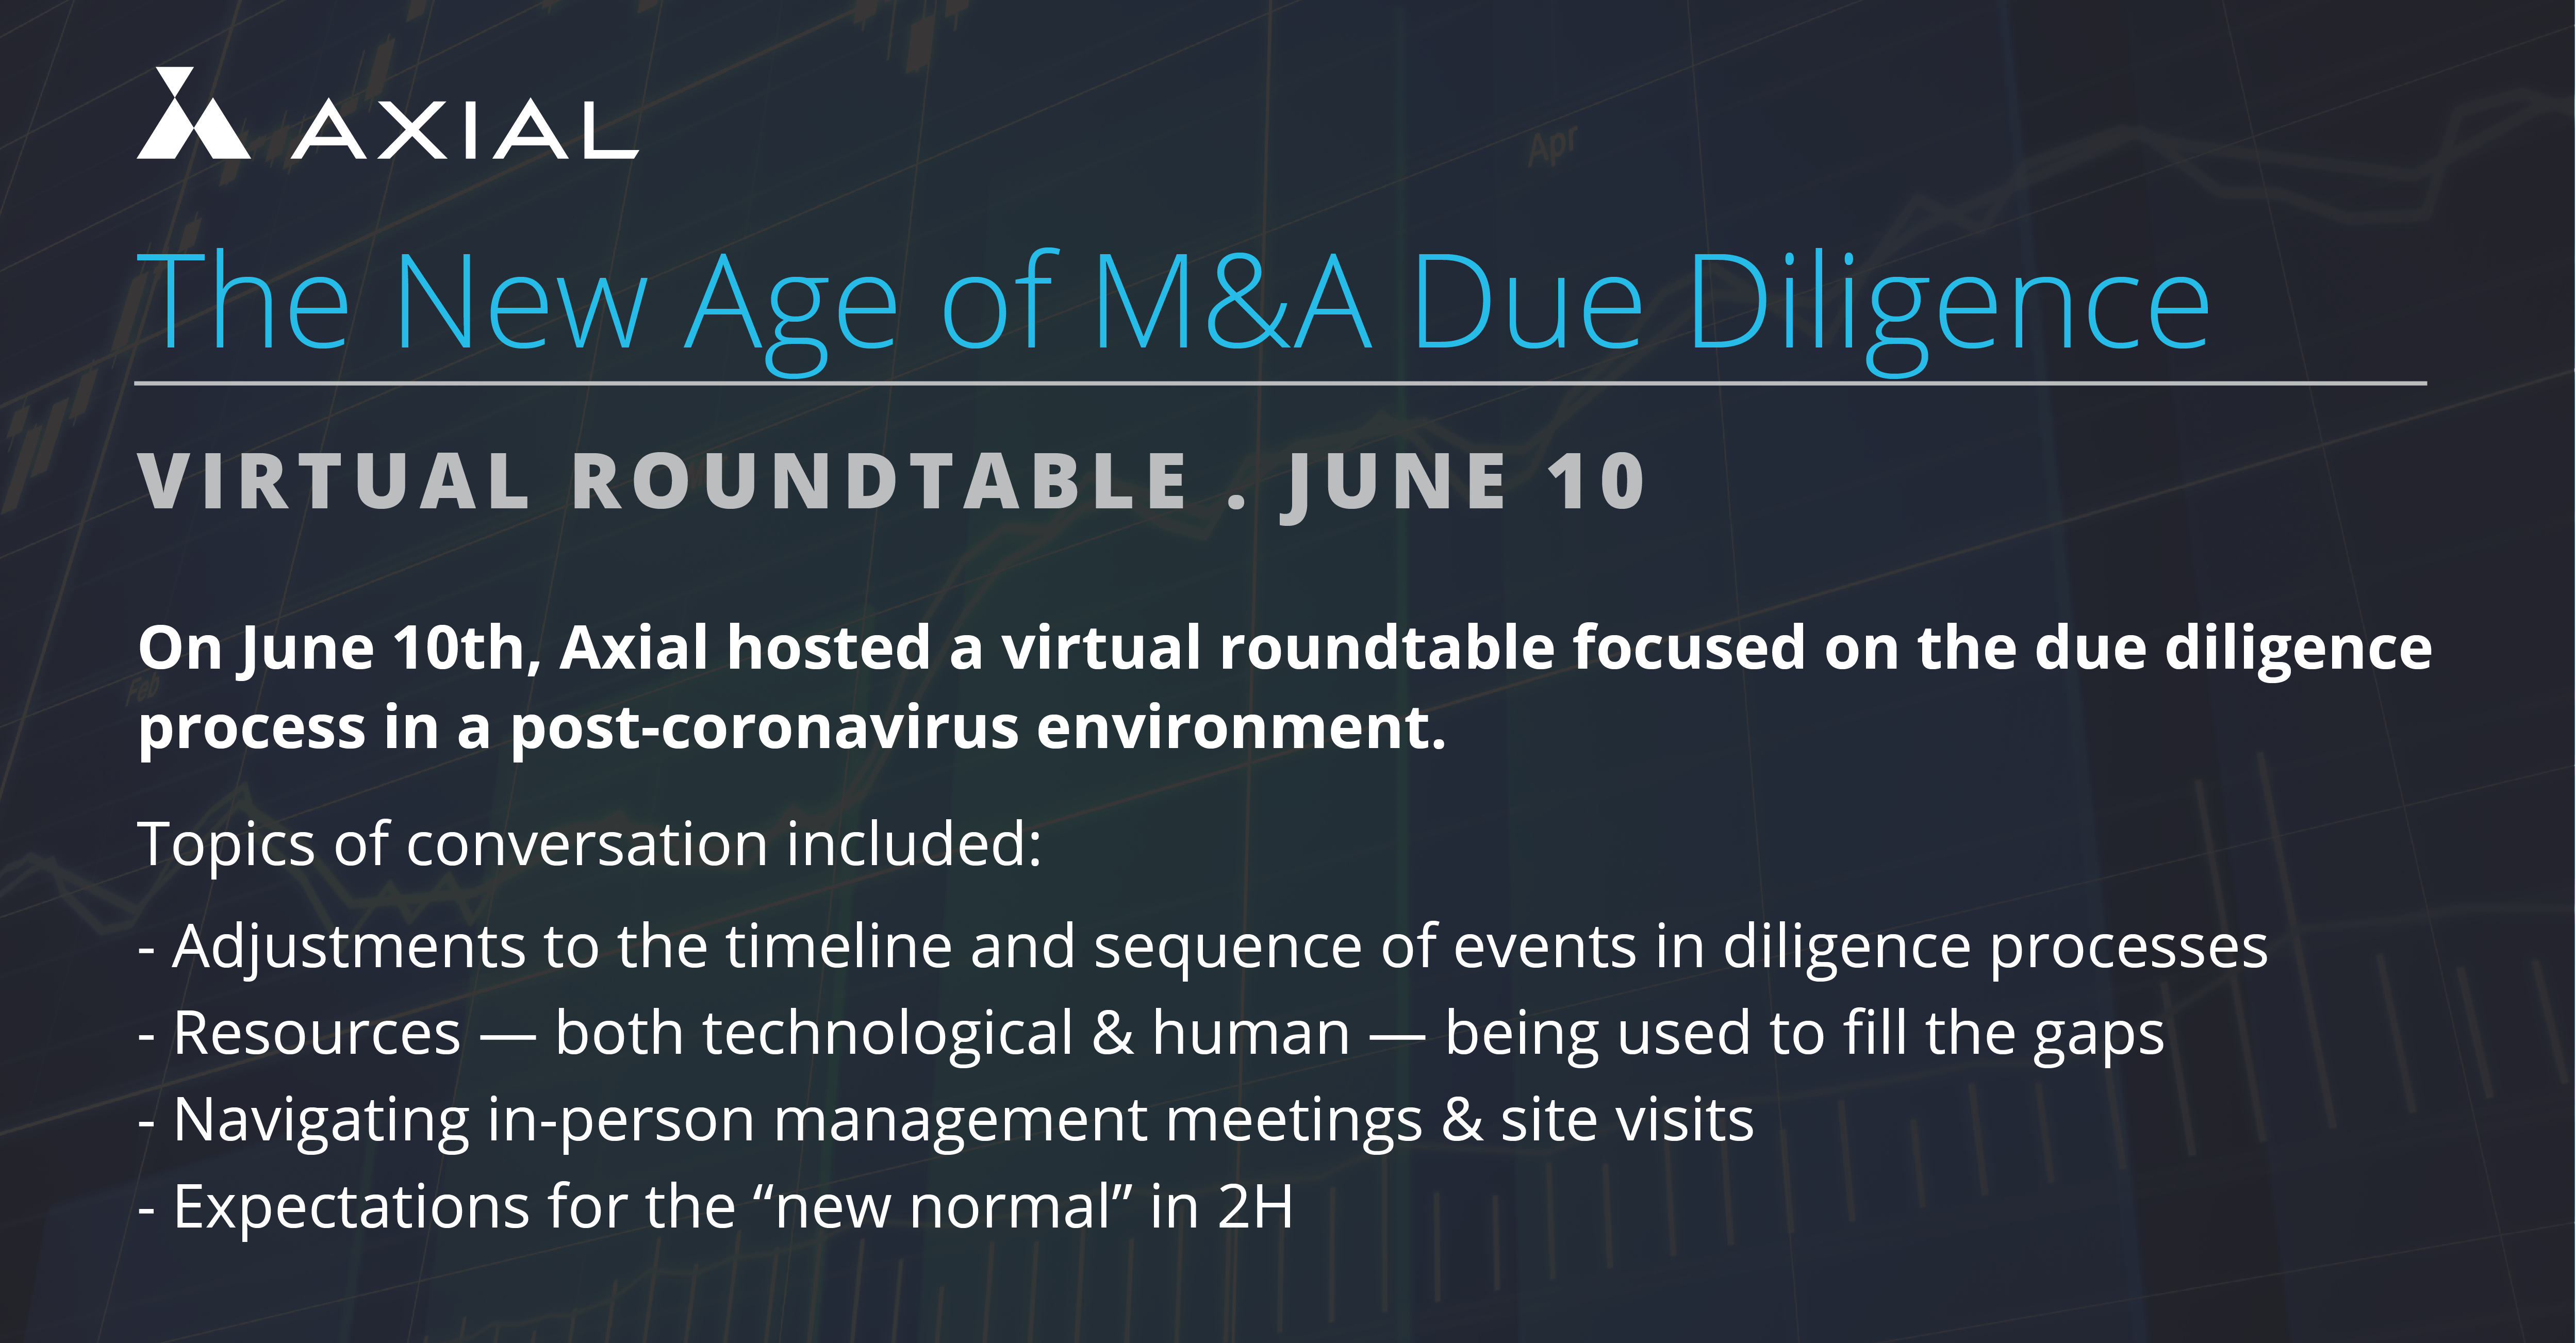 Virtual Round Table Details